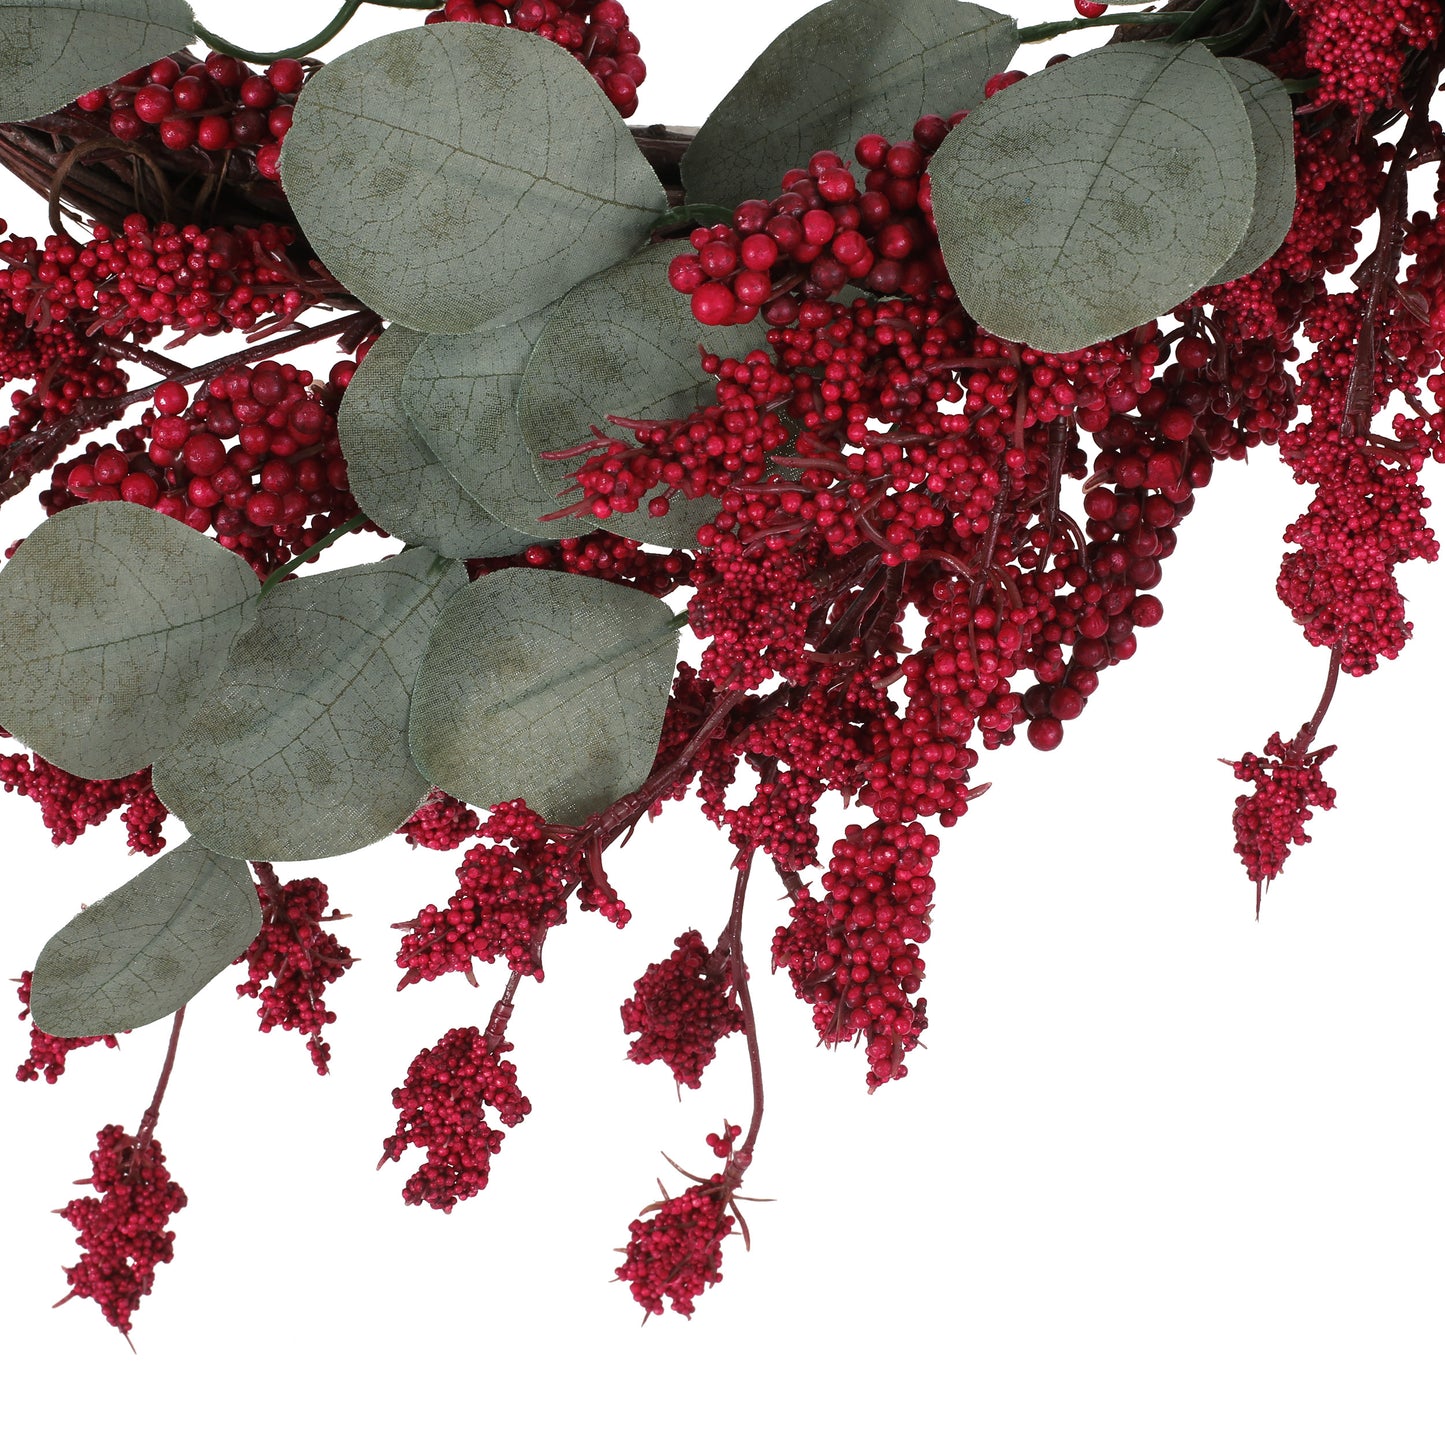 Sedlari 29" Eucalyptus Artificial Wreath with Berries, Green and Red